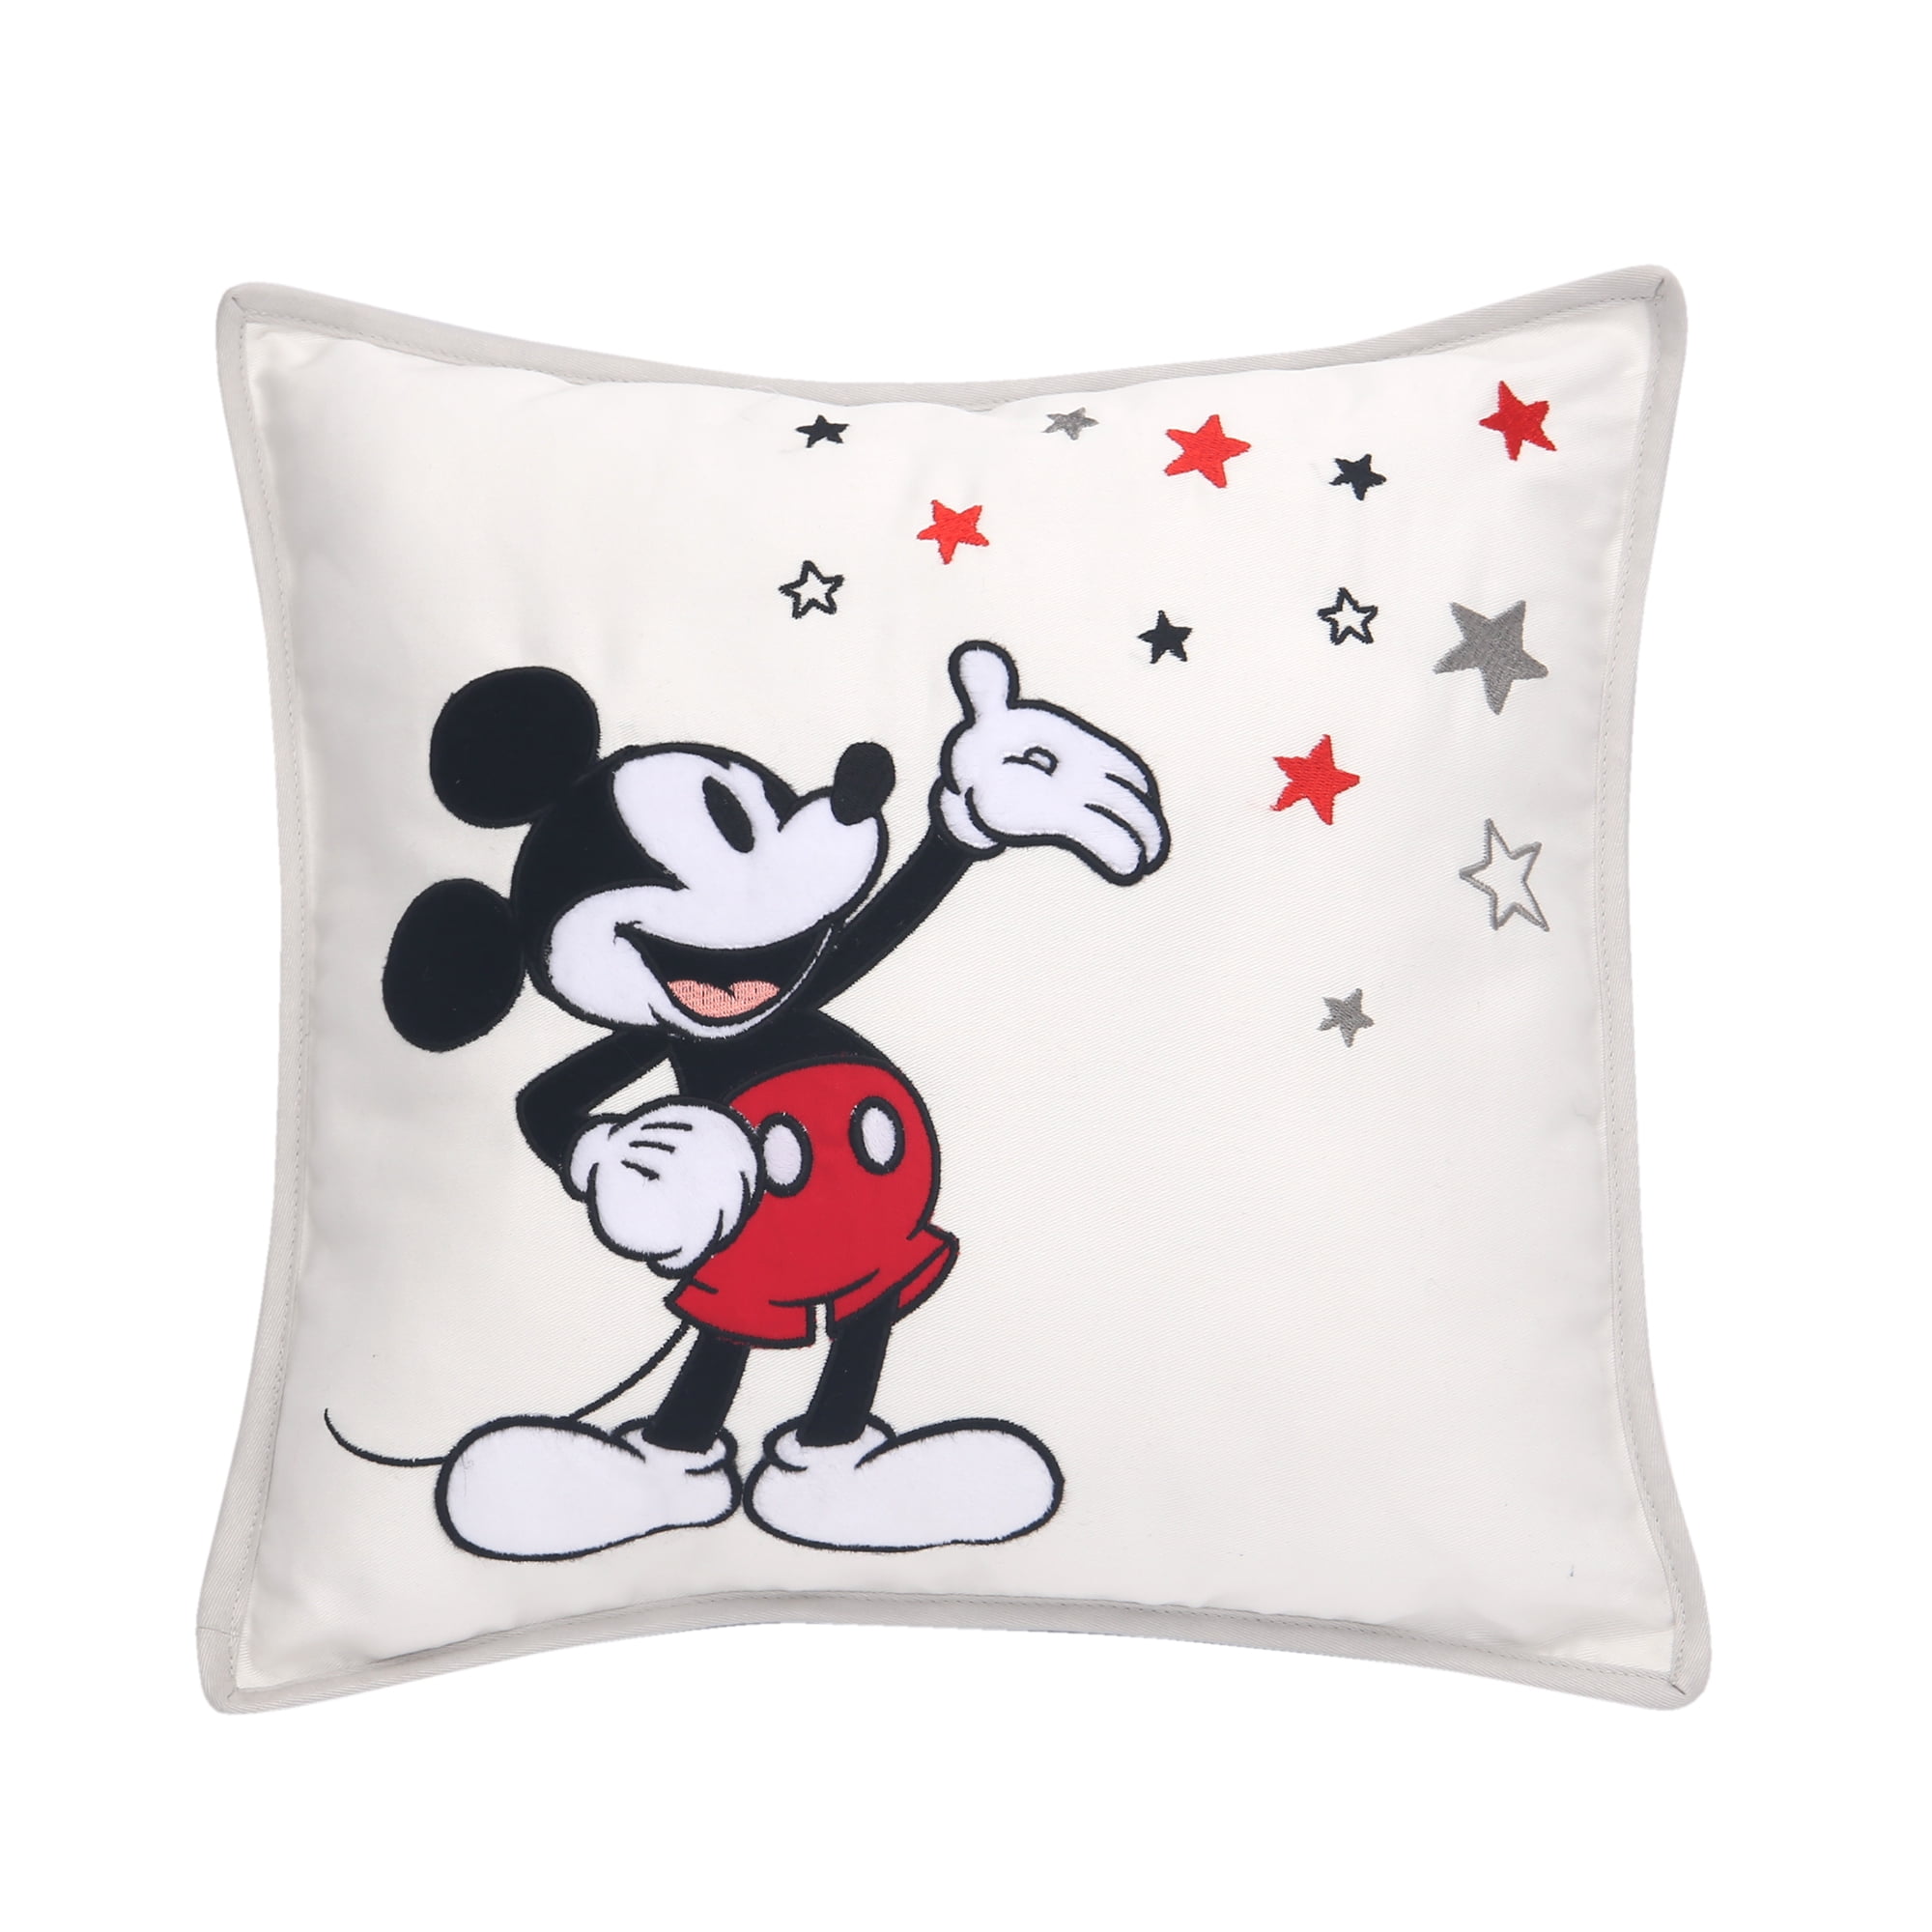 Lambs & Ivy Disney Baby Magical Mickey Mouse Decorative Throw Pillow White 